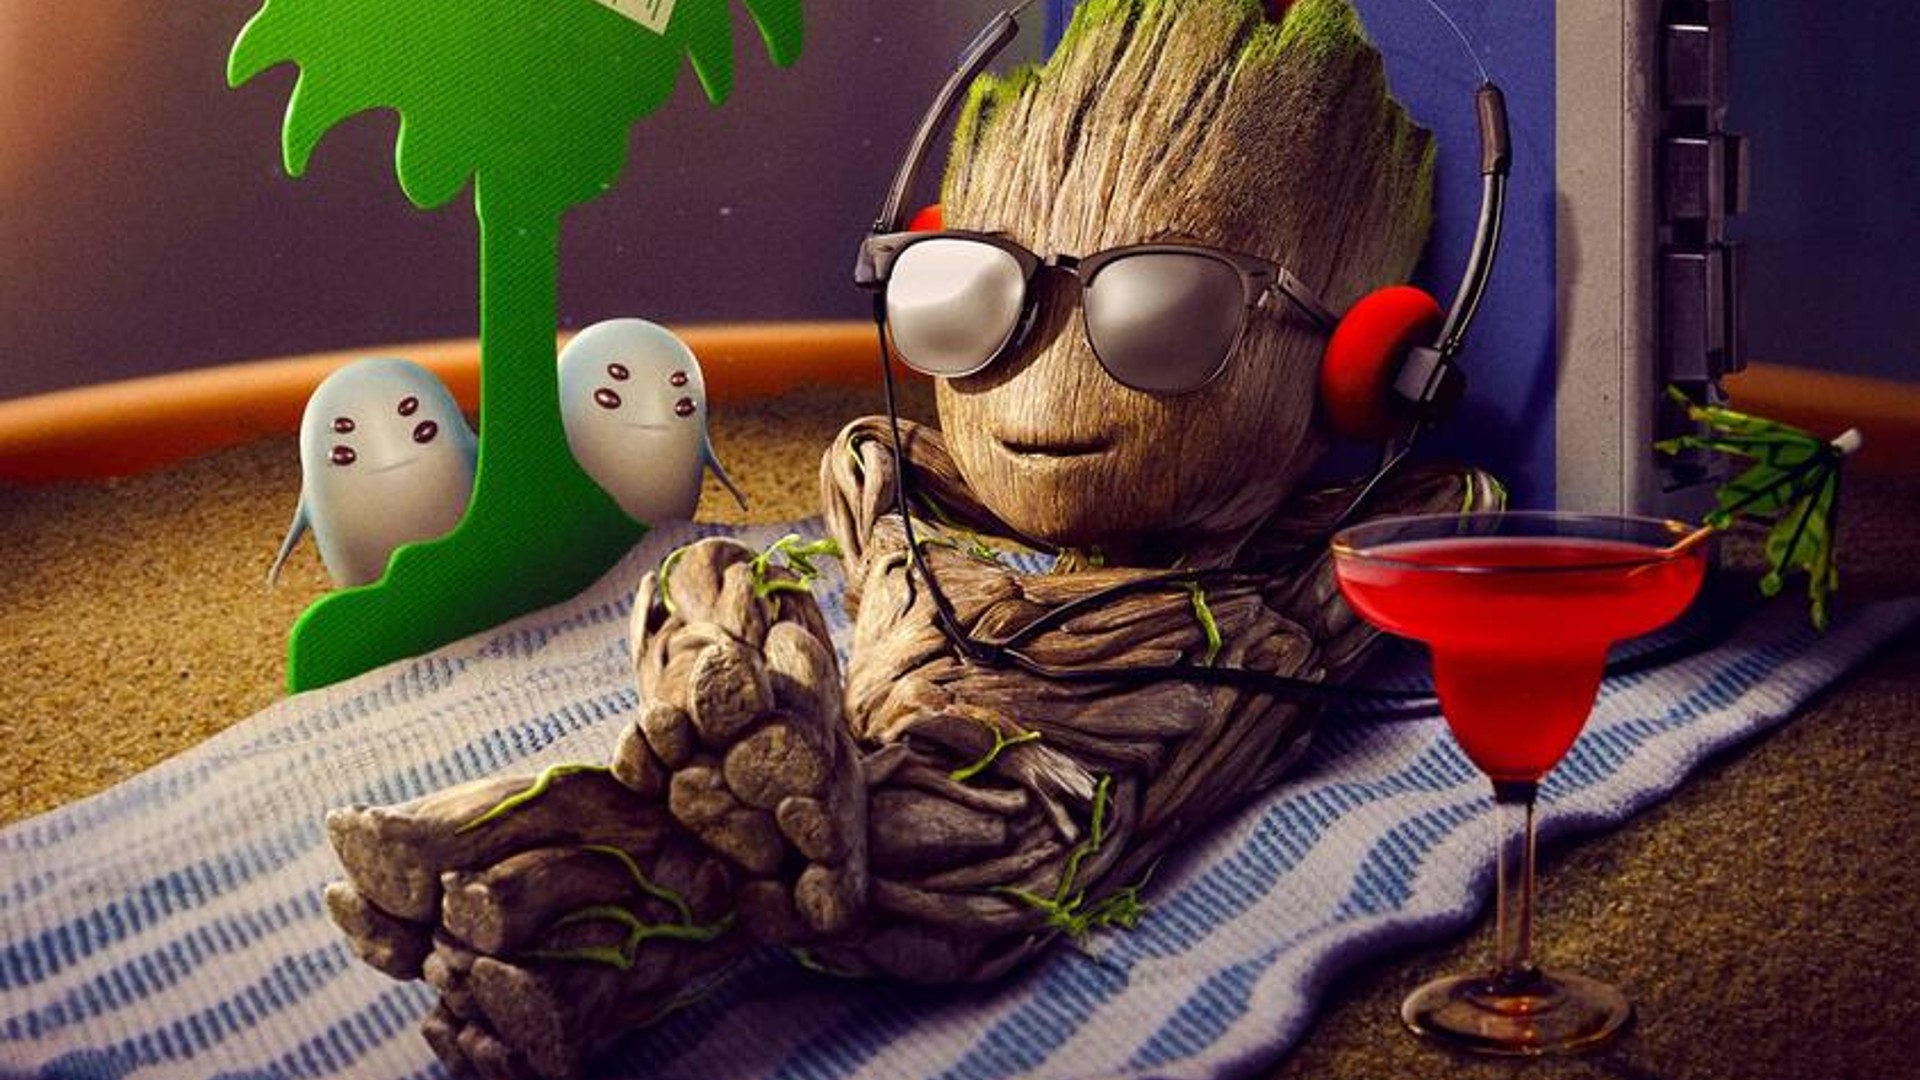 Disney Plus confirms release date of animated spin-off I Am Groot